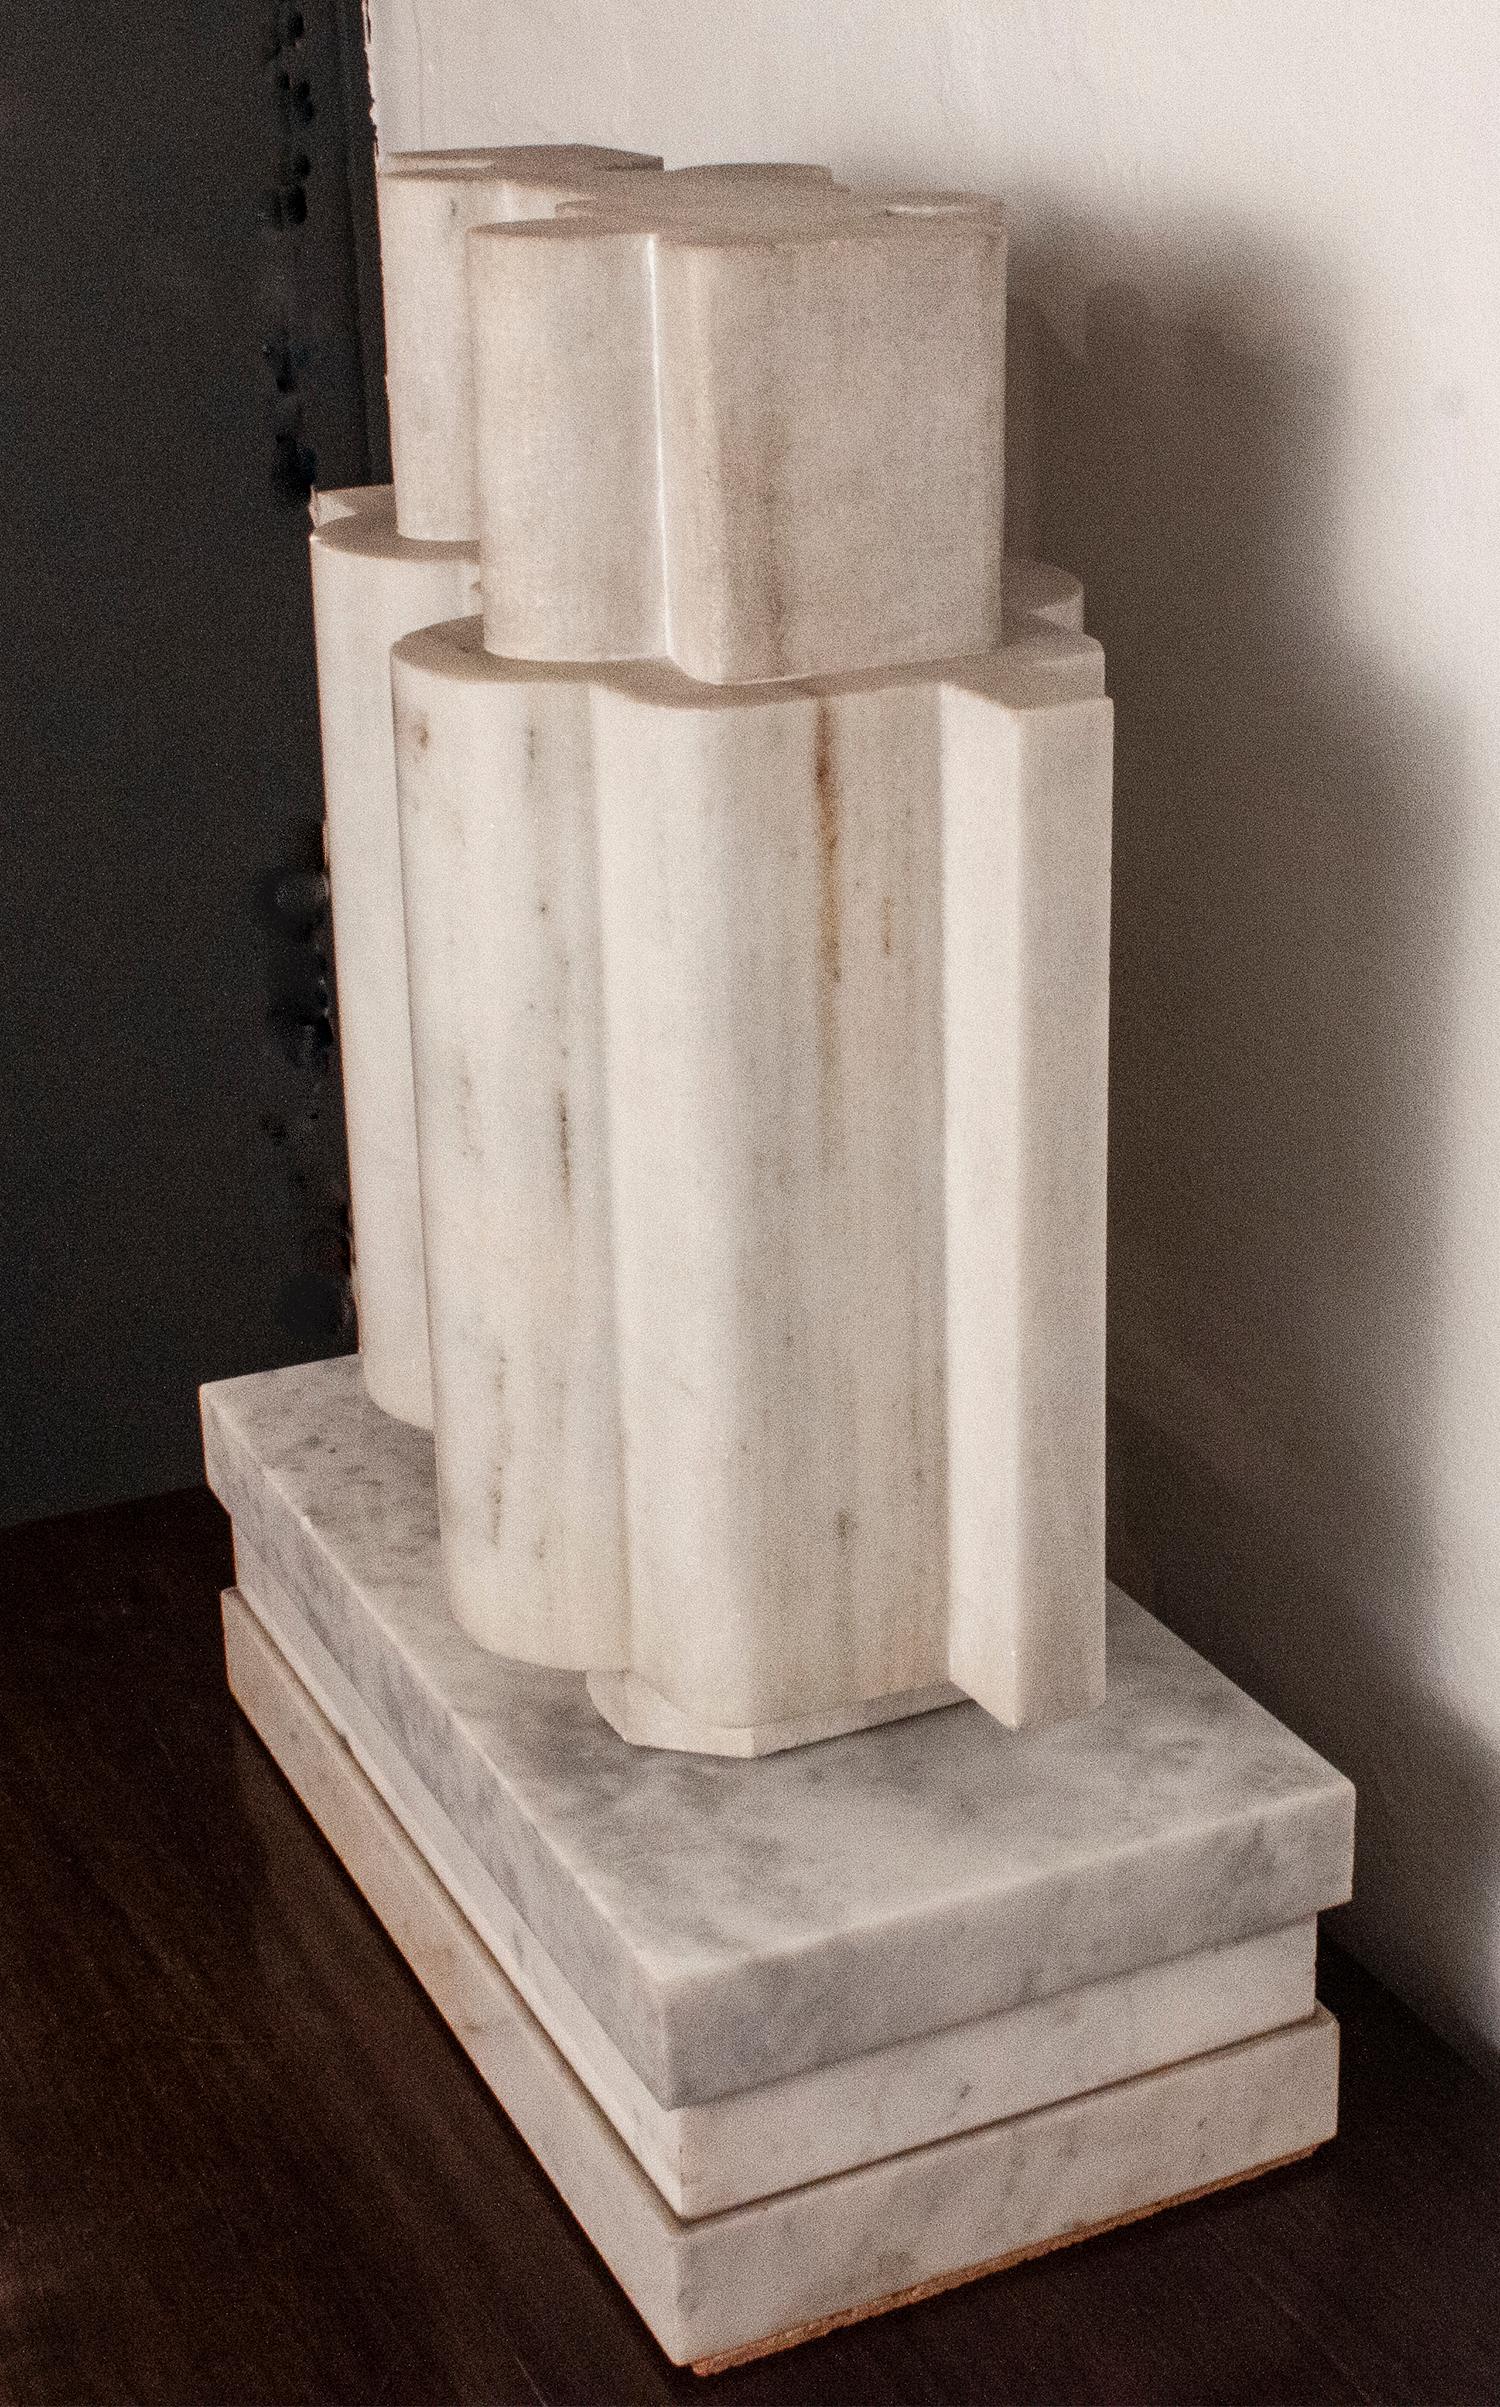 Abstract marble sculpture, in the style of Eduardo Chillida, renowned sculptor from San Sebastian.
It consists of a marble base, measures Width 39cm x Depth 20cm x Height 12cm.
And the sculpture: Width 36cm x Depth 11cm x Height 40cm.
And in